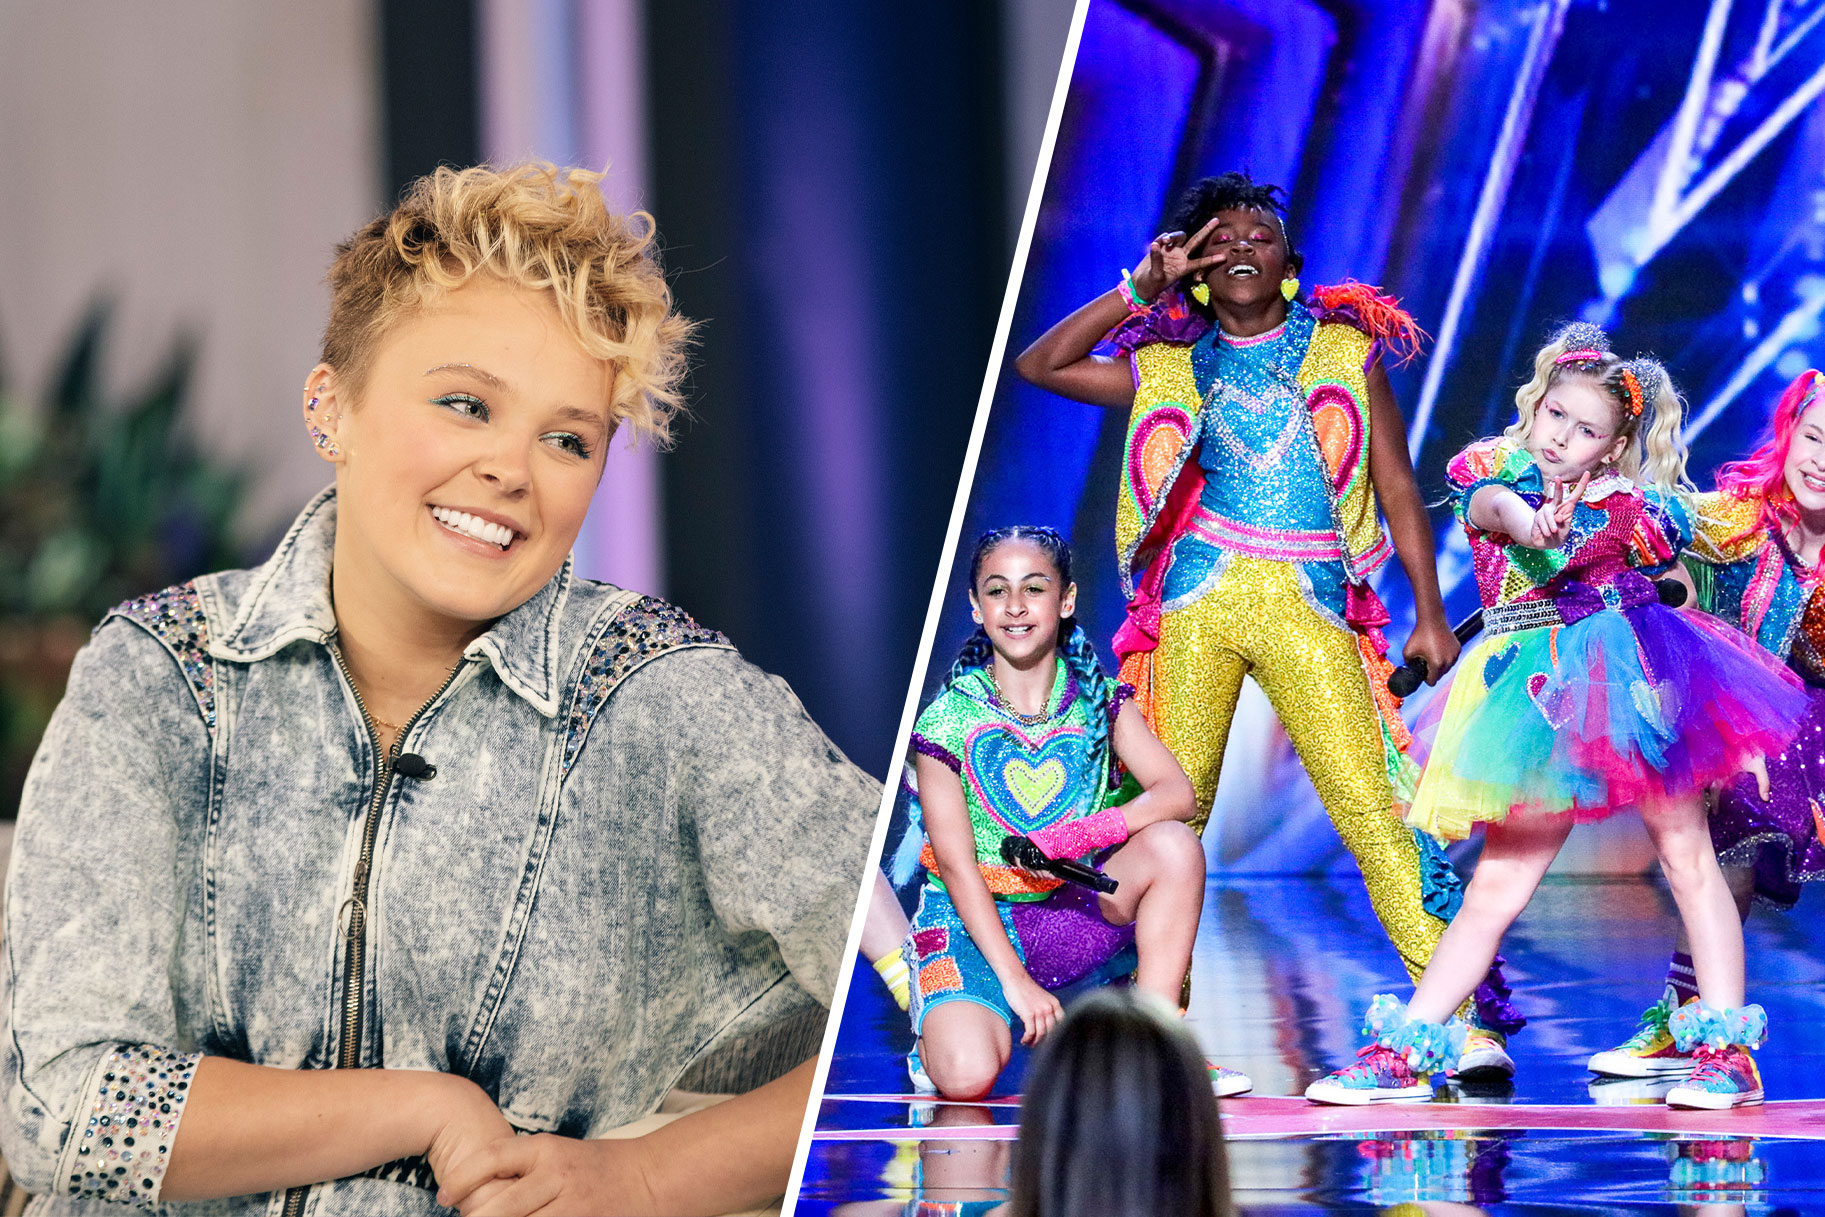 Split image of Jojo Siwa on the left and pop group 'Xomg Pop' performing onstageon the right